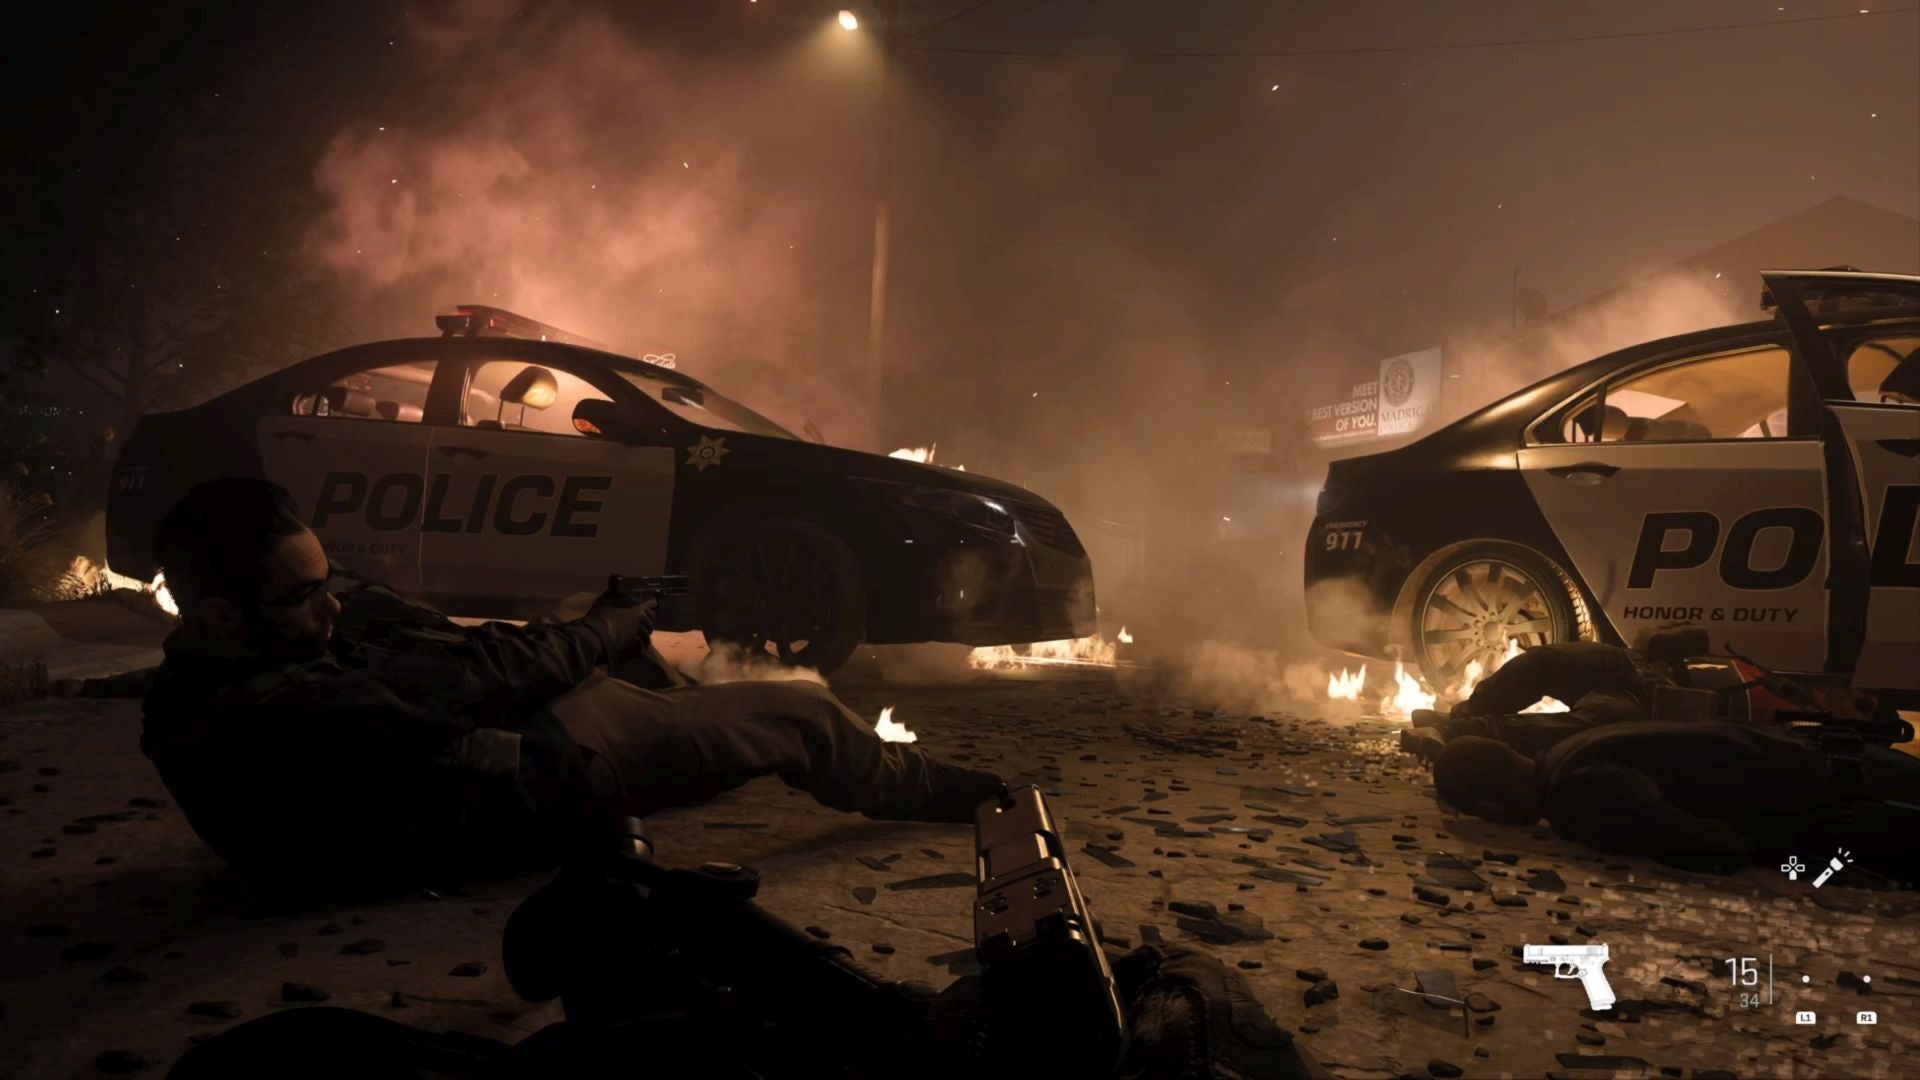 Two burning police cars crashed in a street at night, with the player character lying prone next to a police officer